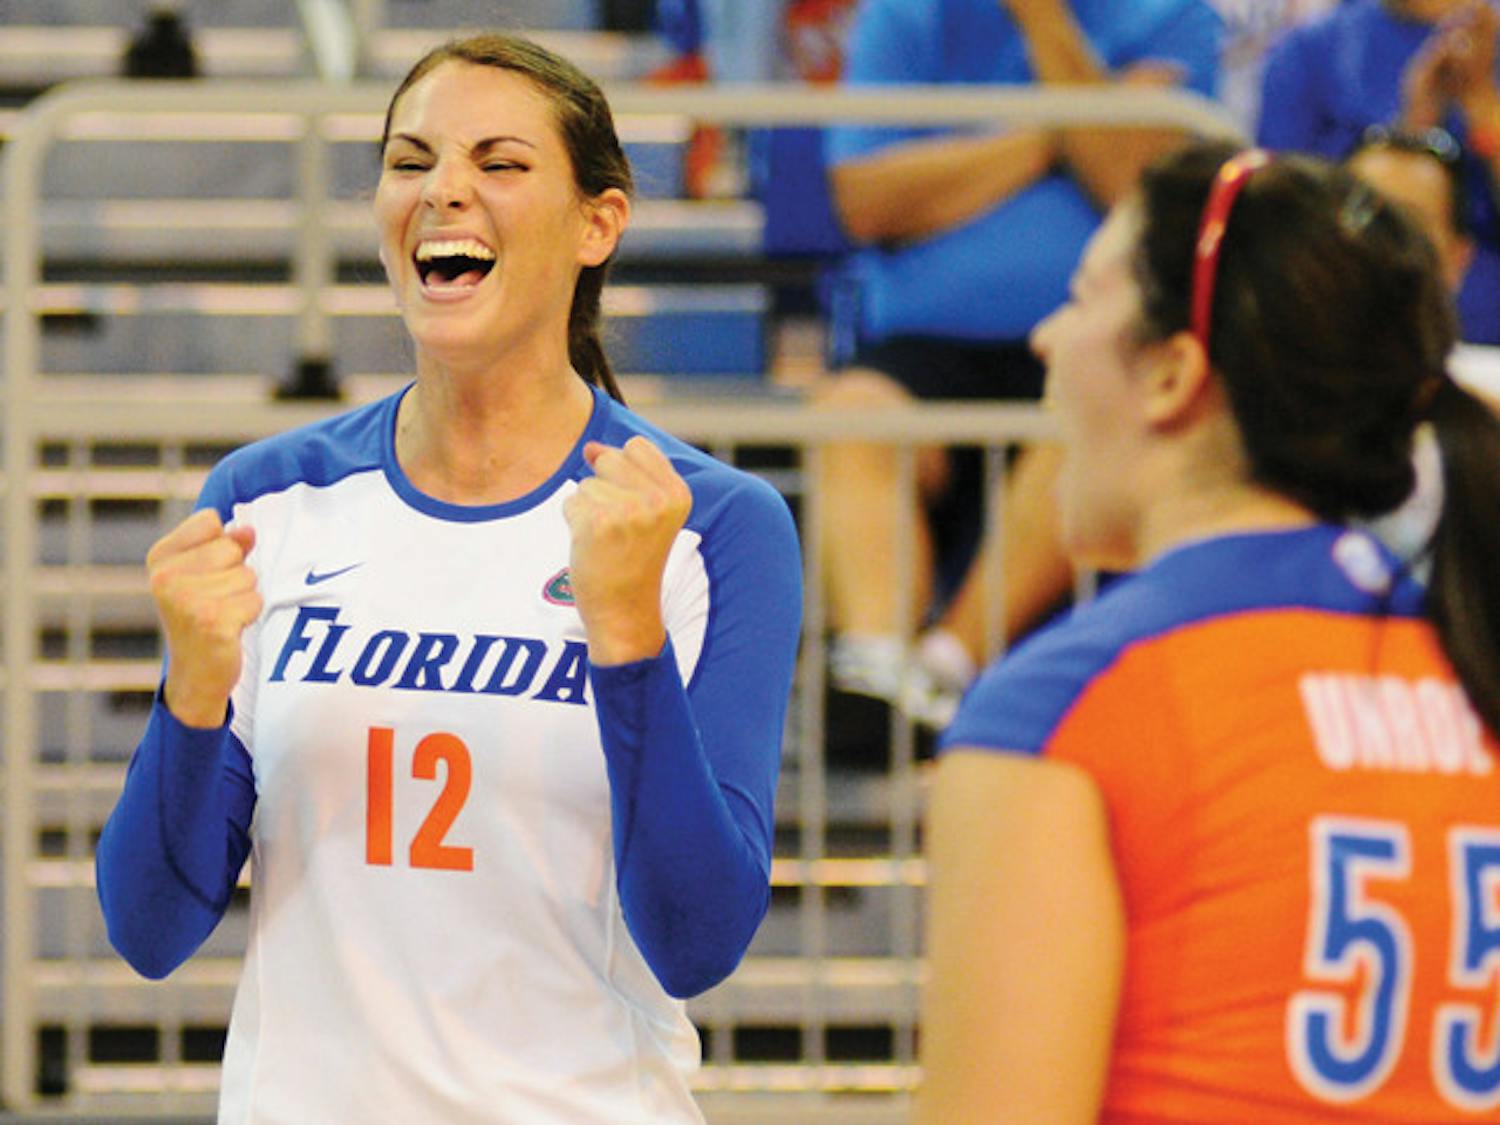 Florida senior Kelly Murphy led the Gators with a triple-double (12 kills, 17 assists and 10 digs) in the team’s win against Florida State on Tuesday in the O’Connell Center. The Gators have not dropped a set this season.